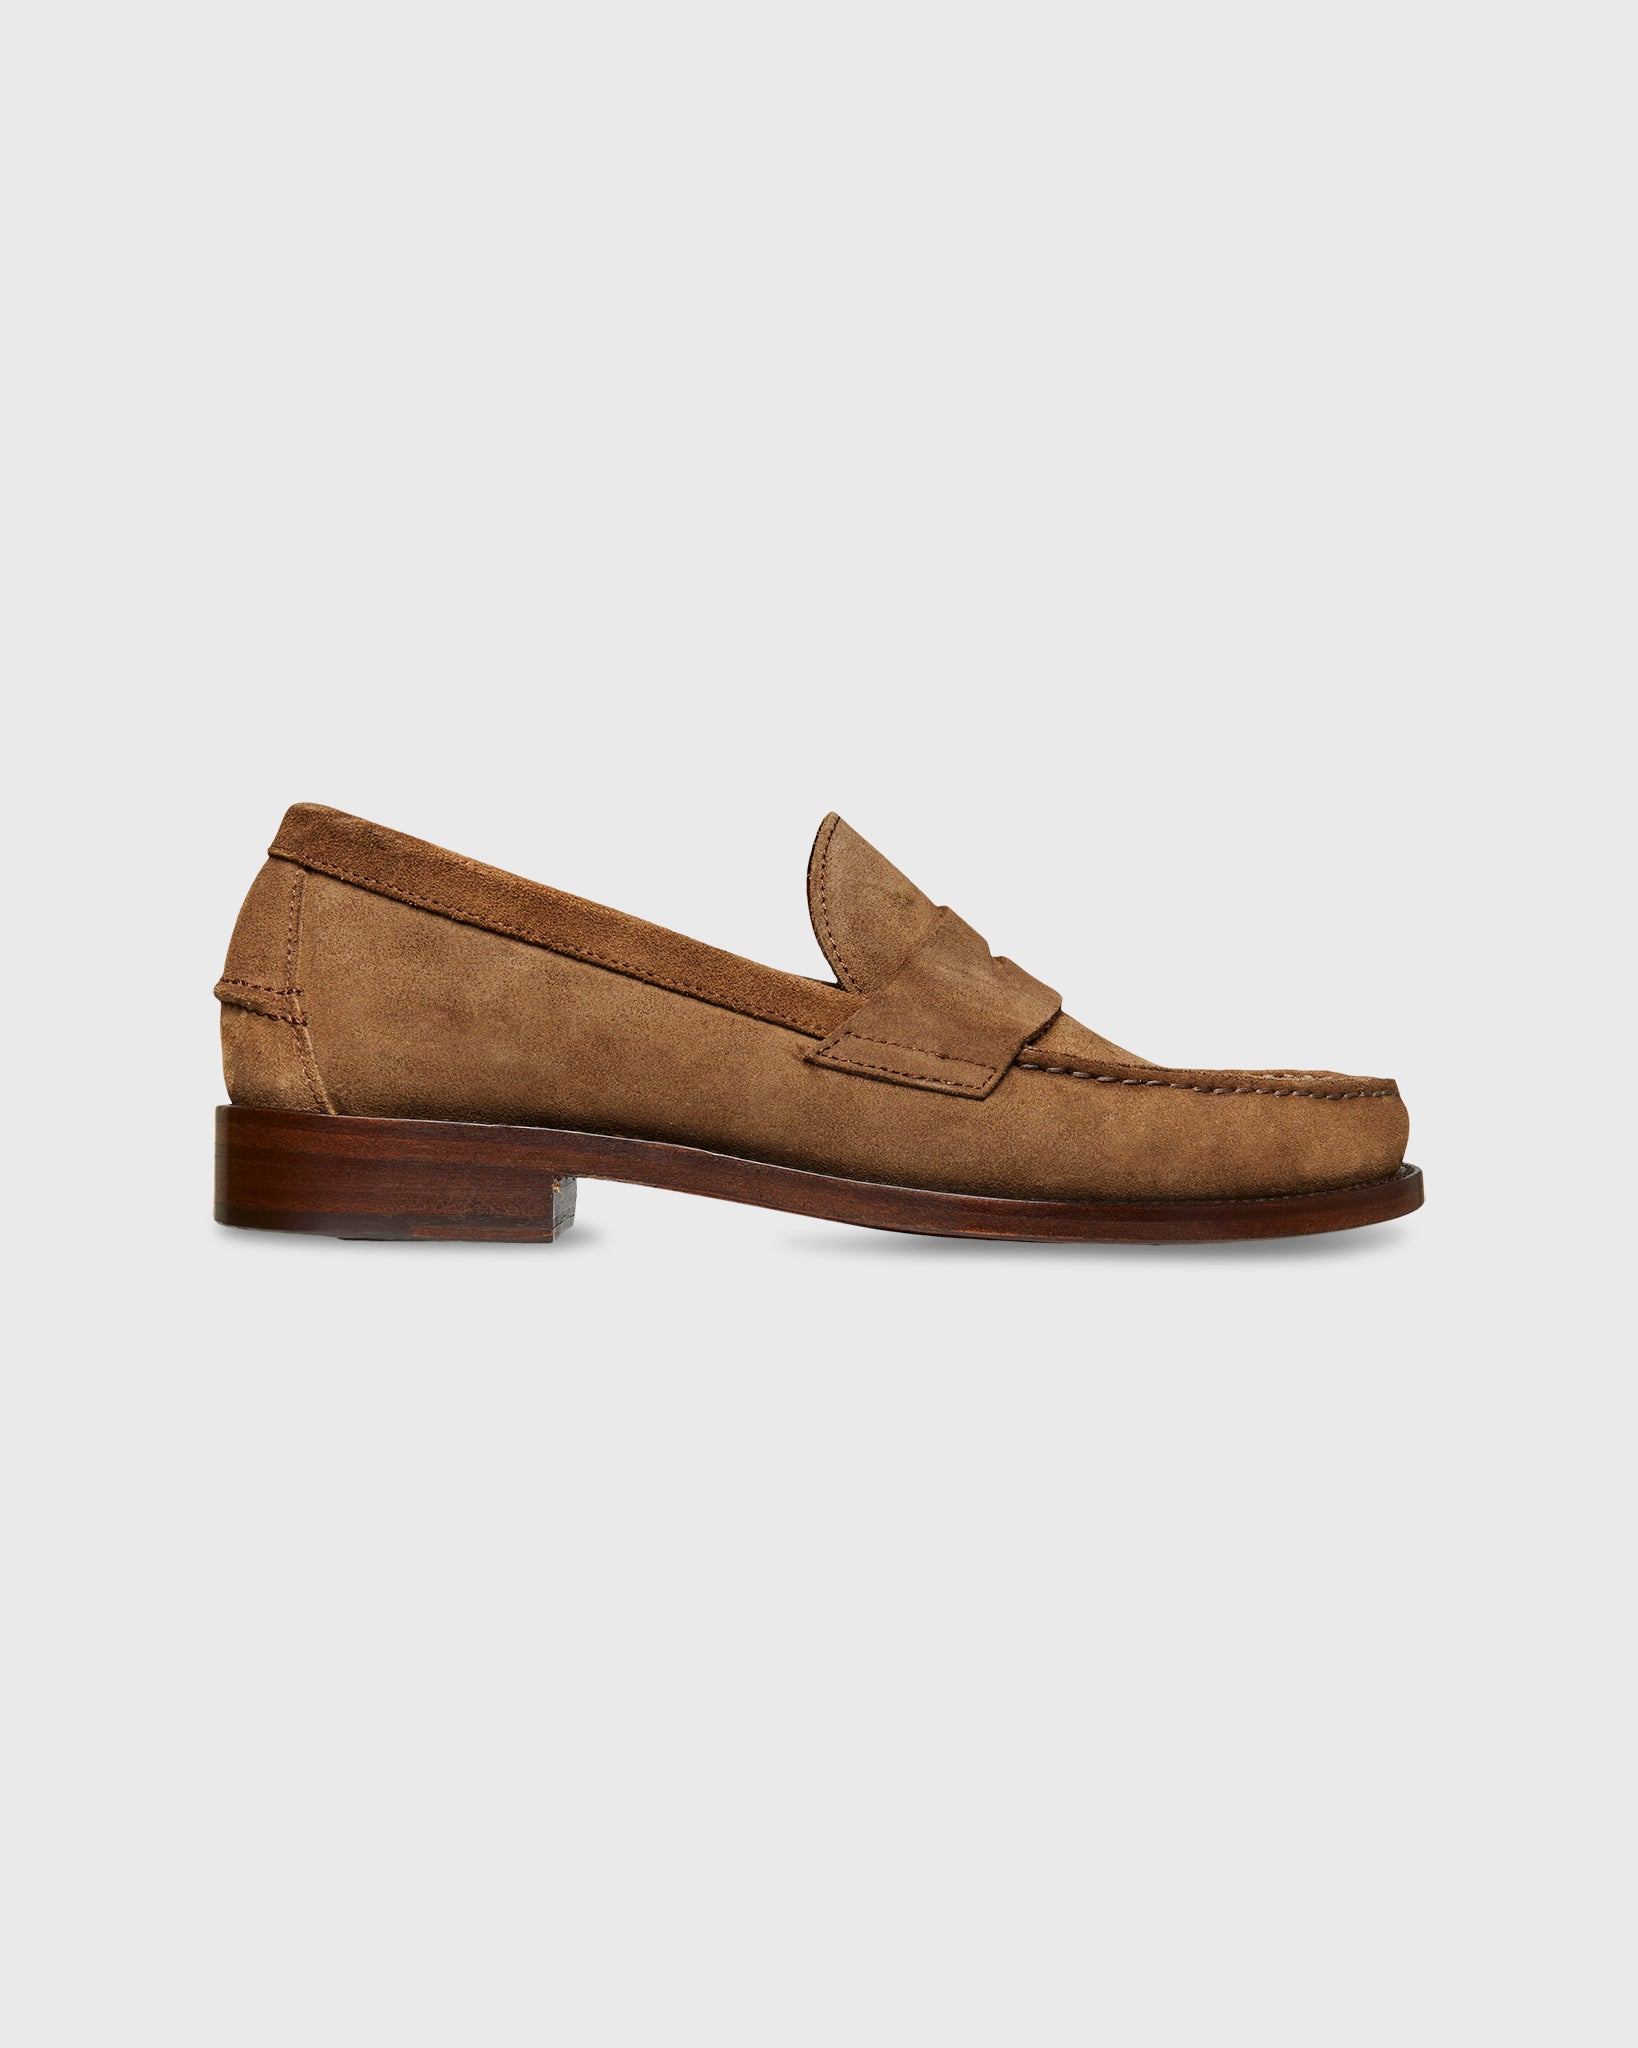 Handsewn Penny Loafer in Cigar Suede